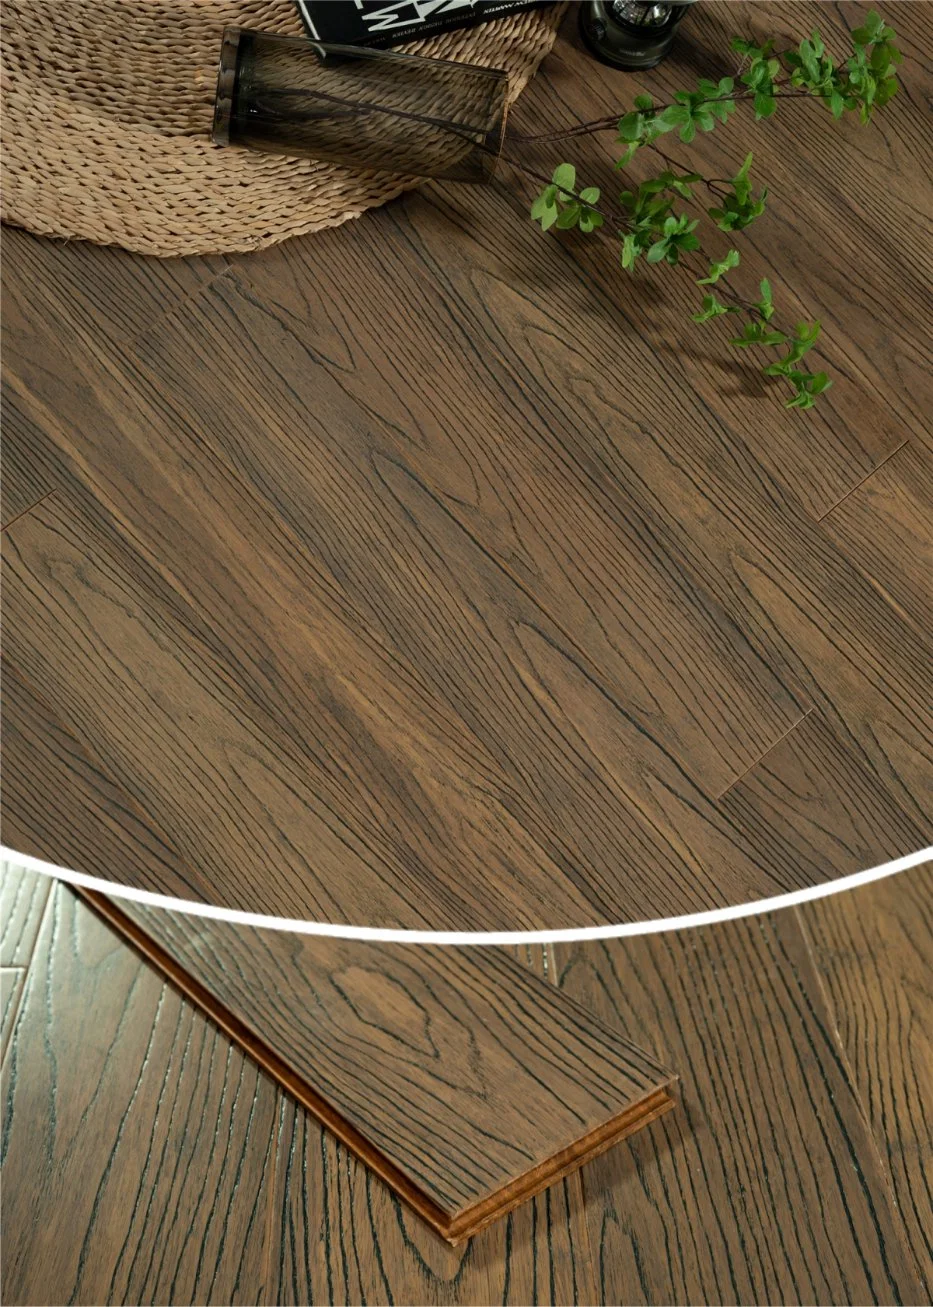 New Selection Waterproof Household Underfloor Heating 15mm Abcd Grade Strand Woven Bamboo Flooring for Home Decoration